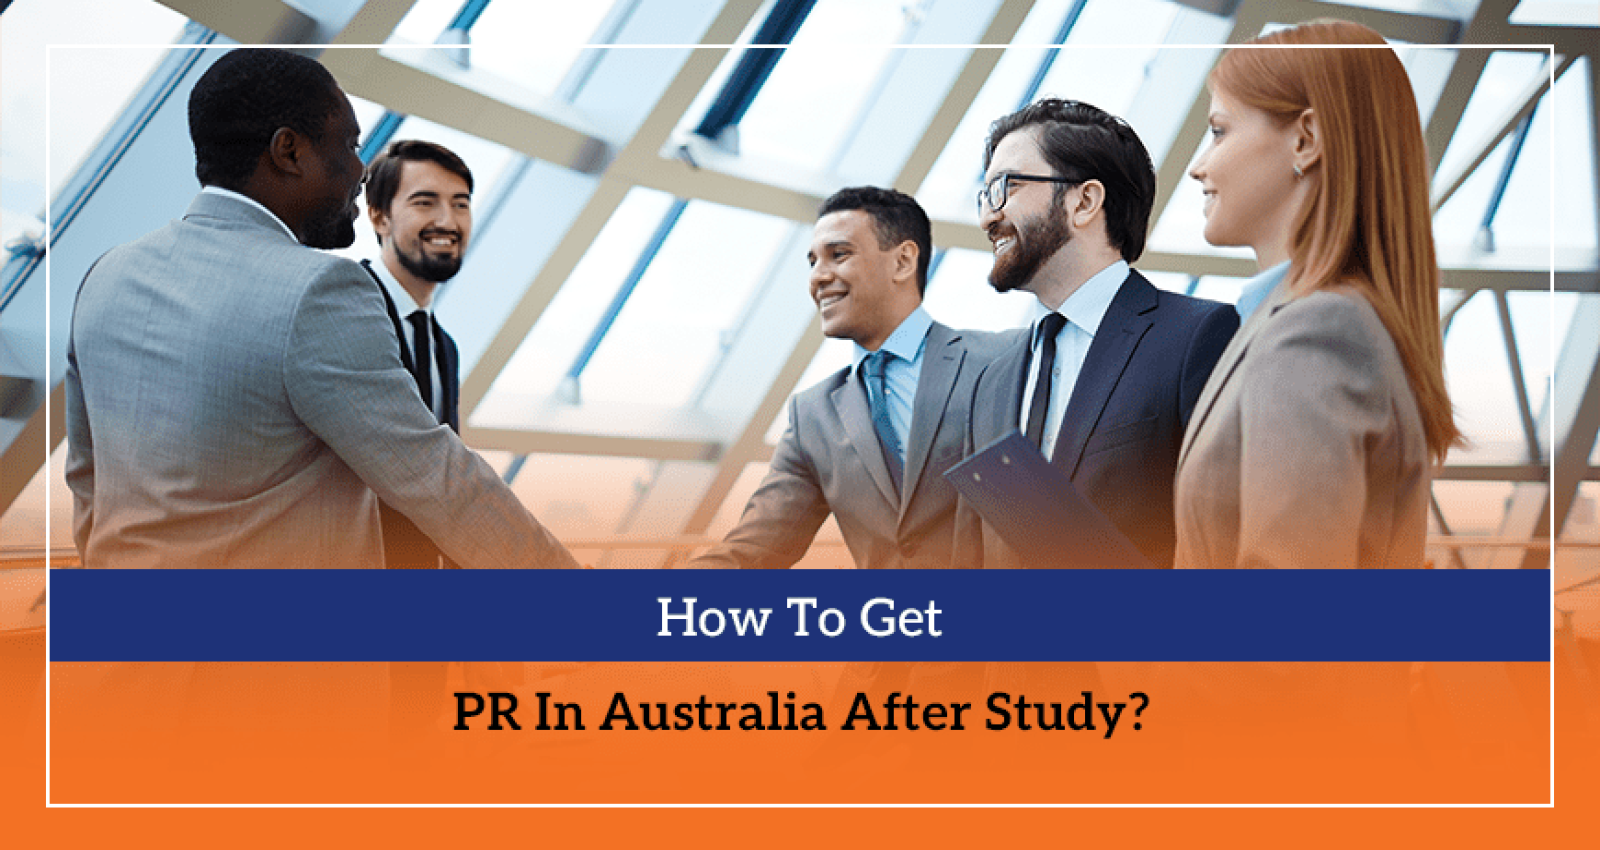 How To Get PR In Australia After Study